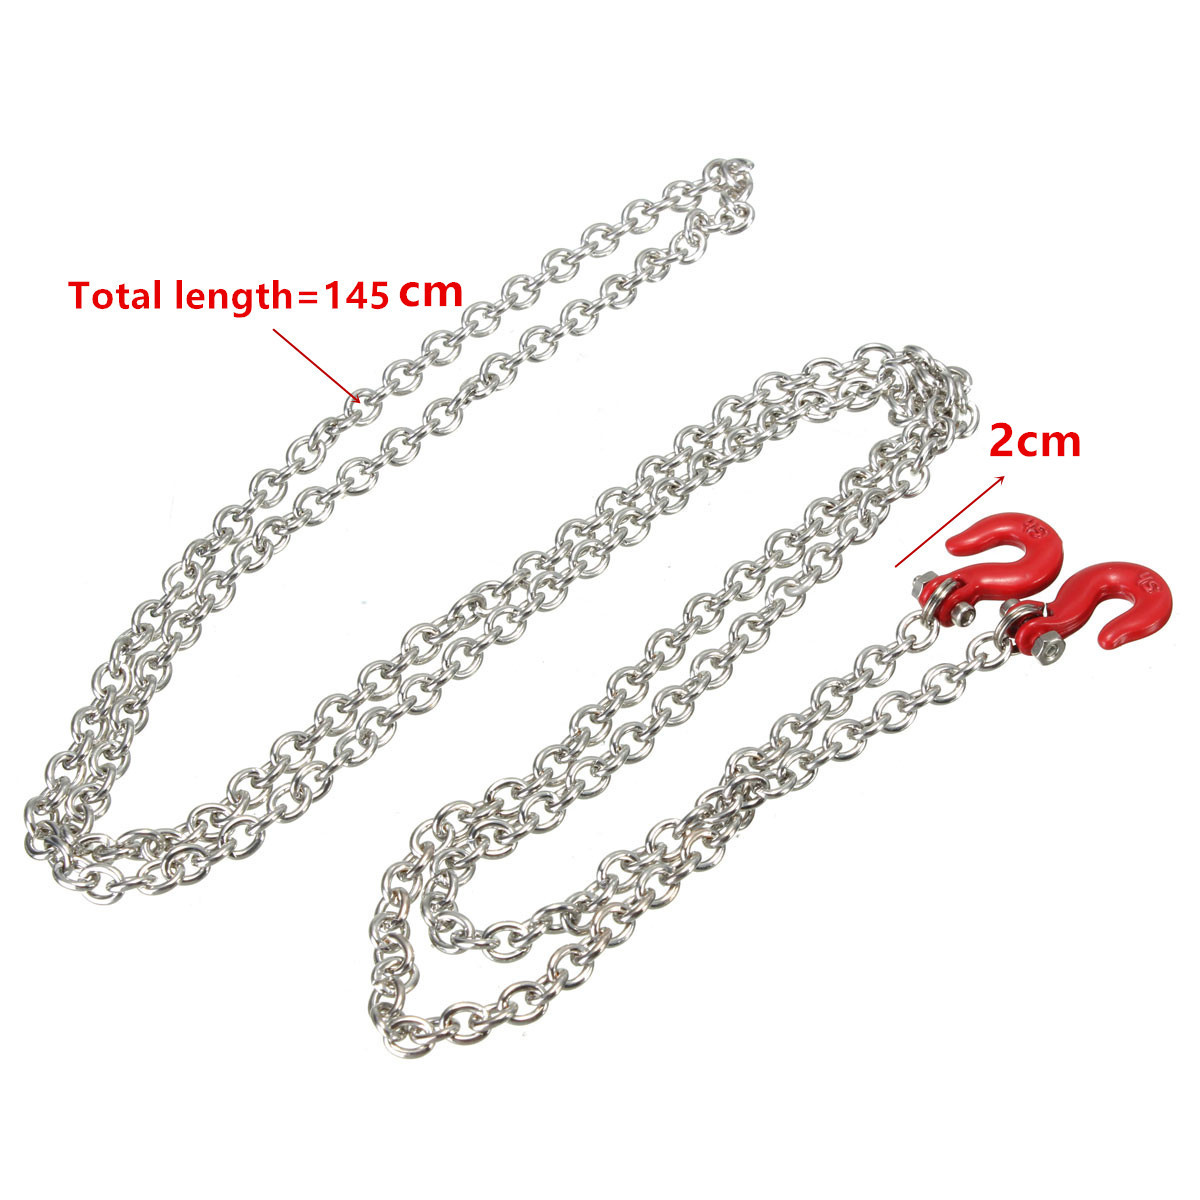 Scale-Trailer-Rope-Chain-With-Coupler-Climbing-Hook-Crawler-Truck-145cm-1036443